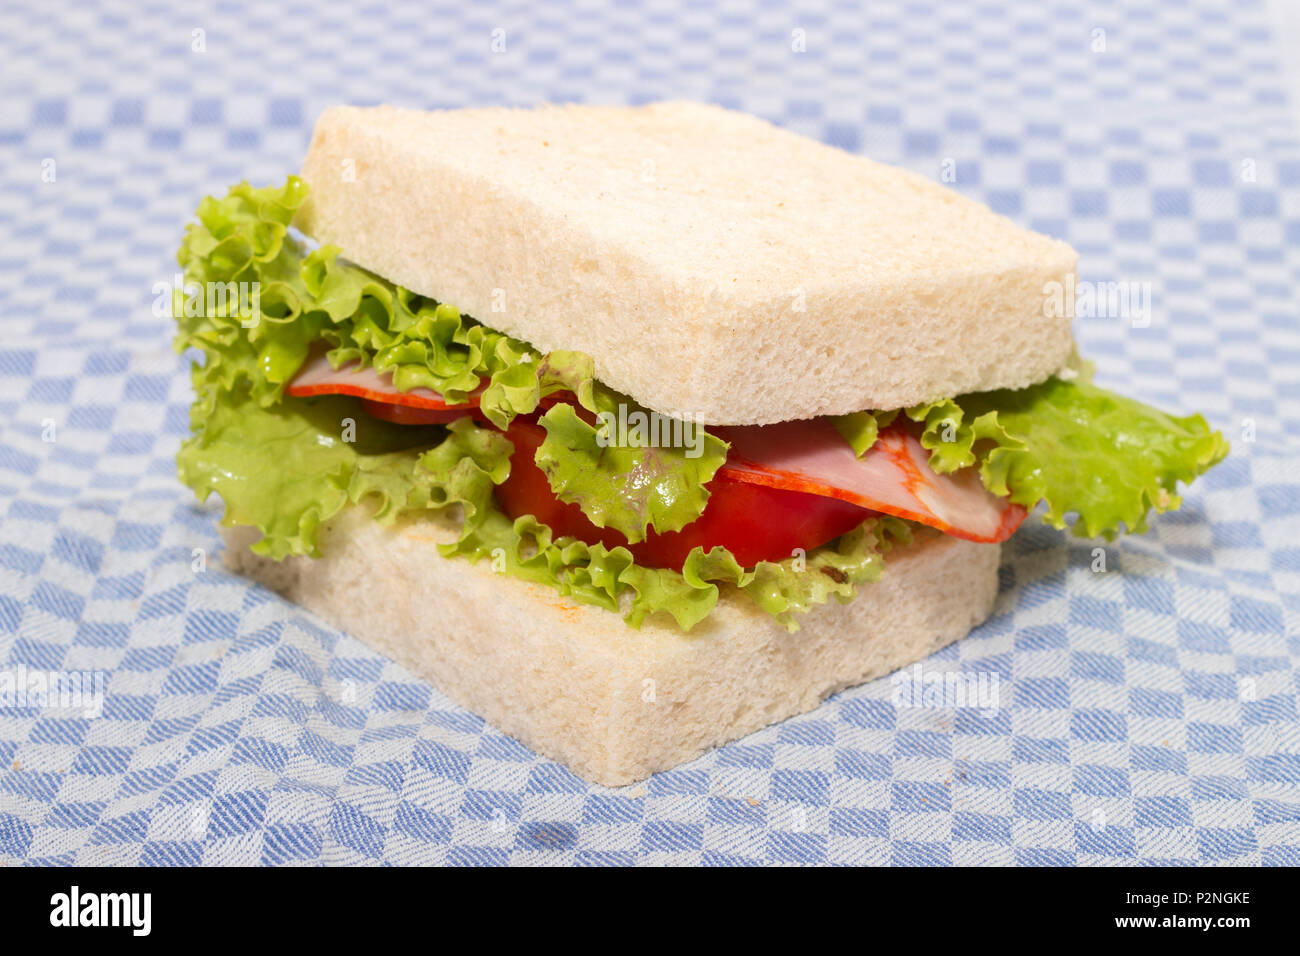 sandwich with paio sausage over a blue cloth. Stock Photo